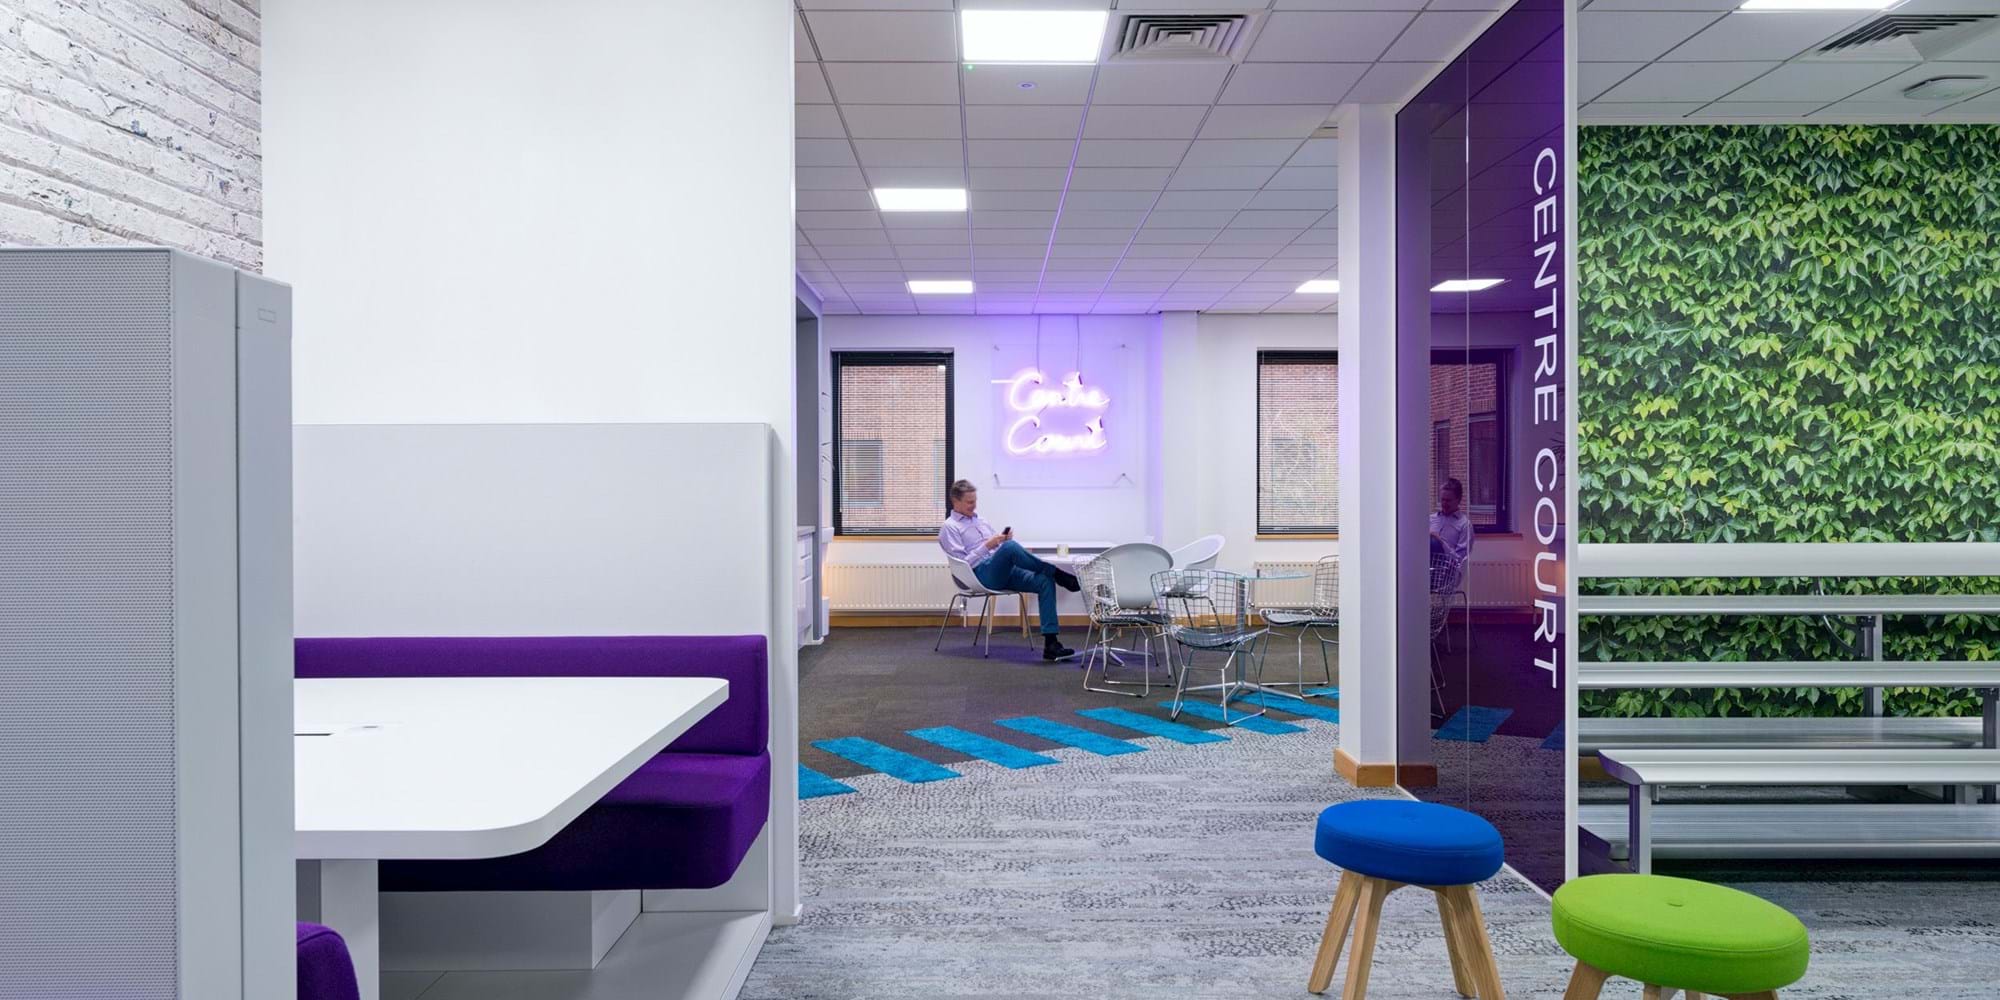 Modus Workspace office design, fit out and refurbishment - Reed - Oxford - Booths - Reed Elsevier Oxford 06 highres sRGB.jpg